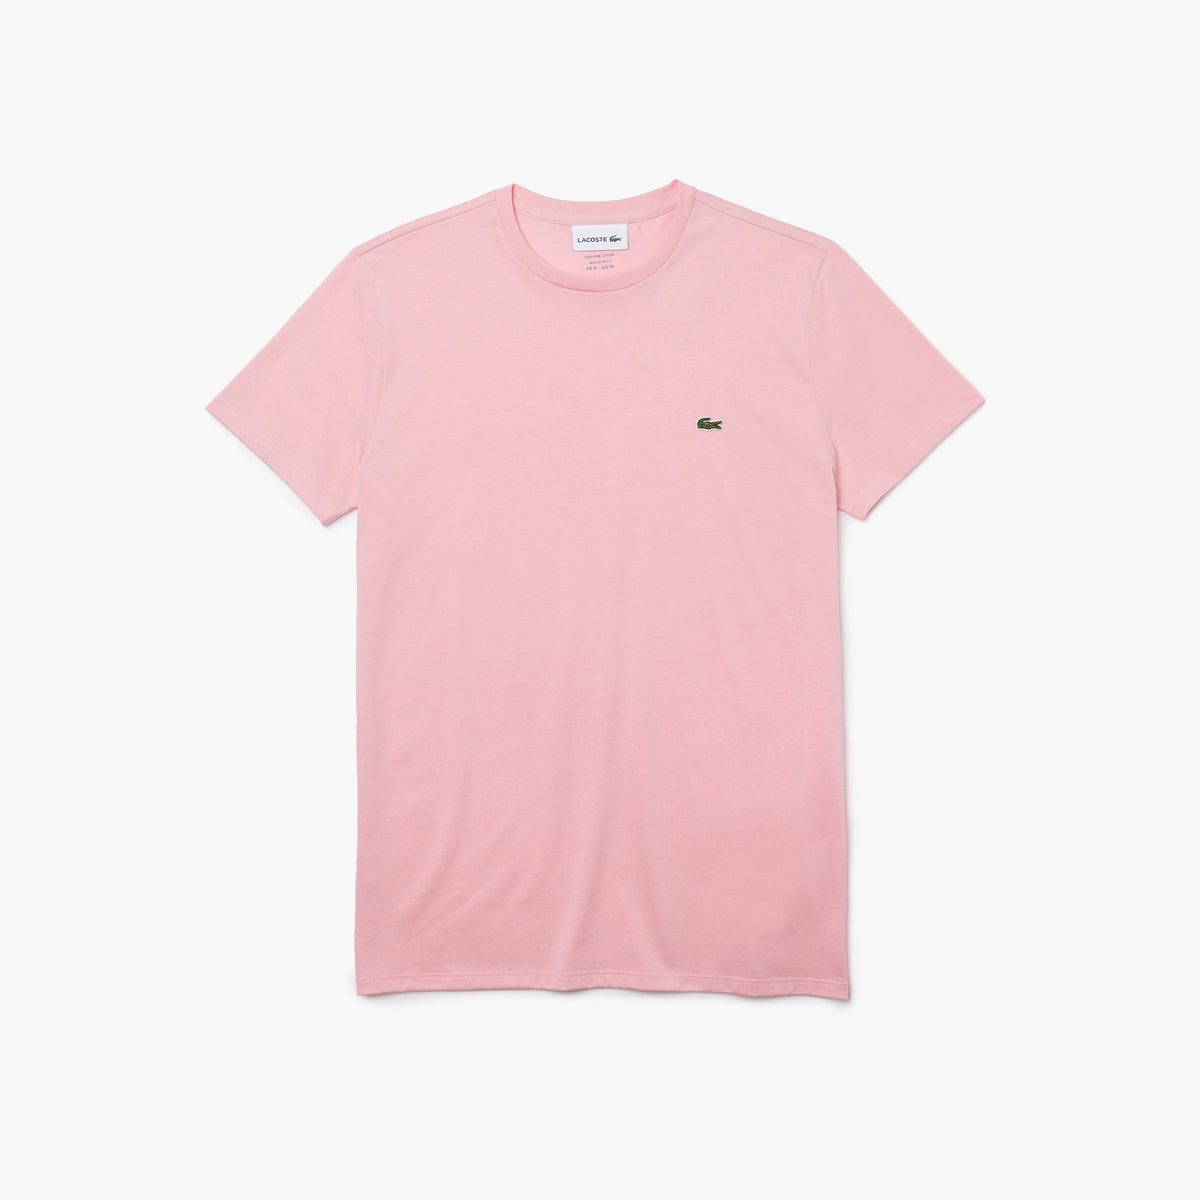 Men's Crew Neck Pima Cotton Jersey T-shirt - Pink 7SY  ( TH6709 )